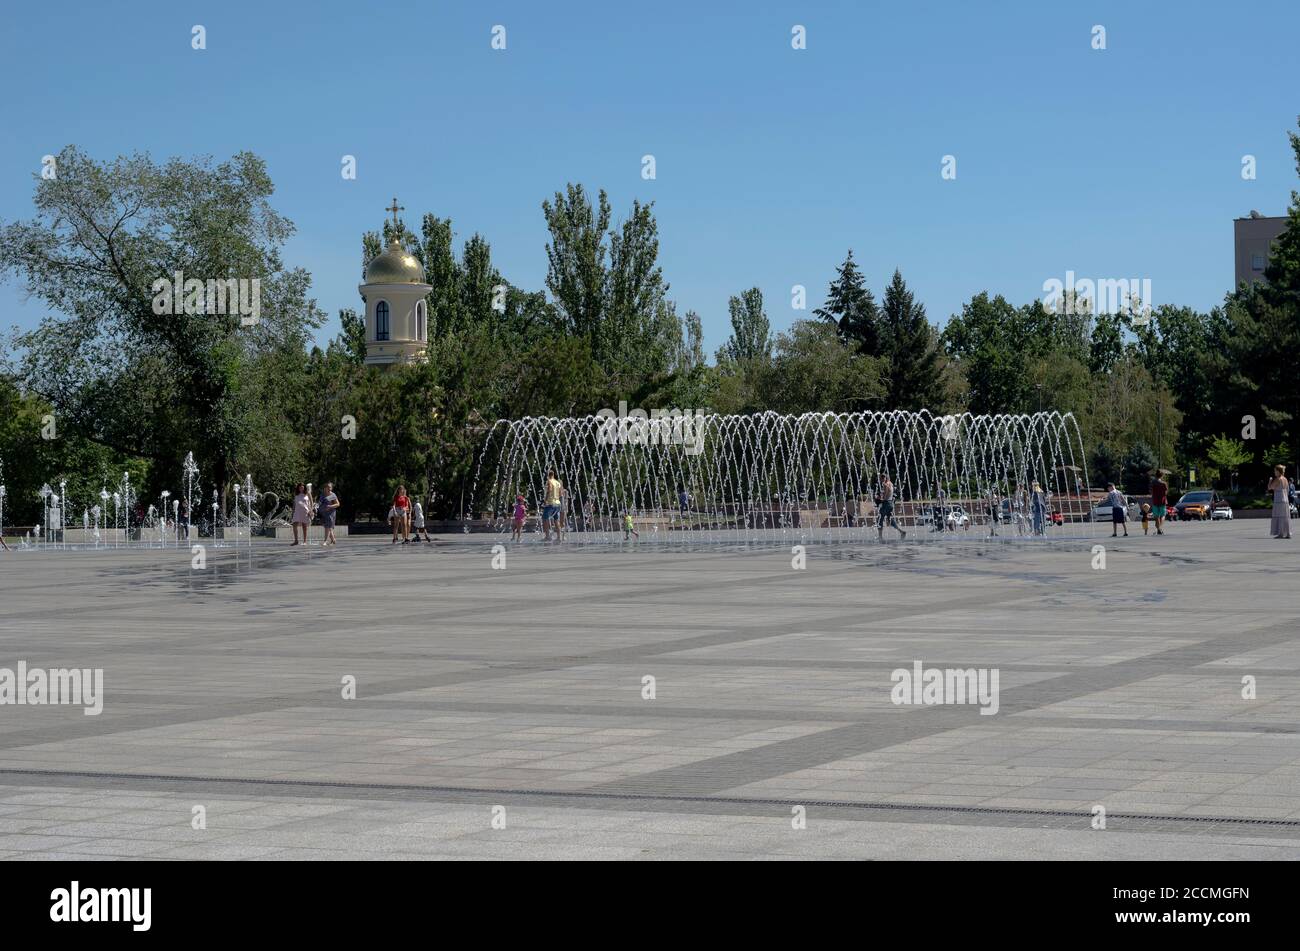 Nikolaev, Ukraine - August 17, 2020: People with children are resting on the city square with fountains. Hot summer day. Travel, tourism.ì Stock Photo